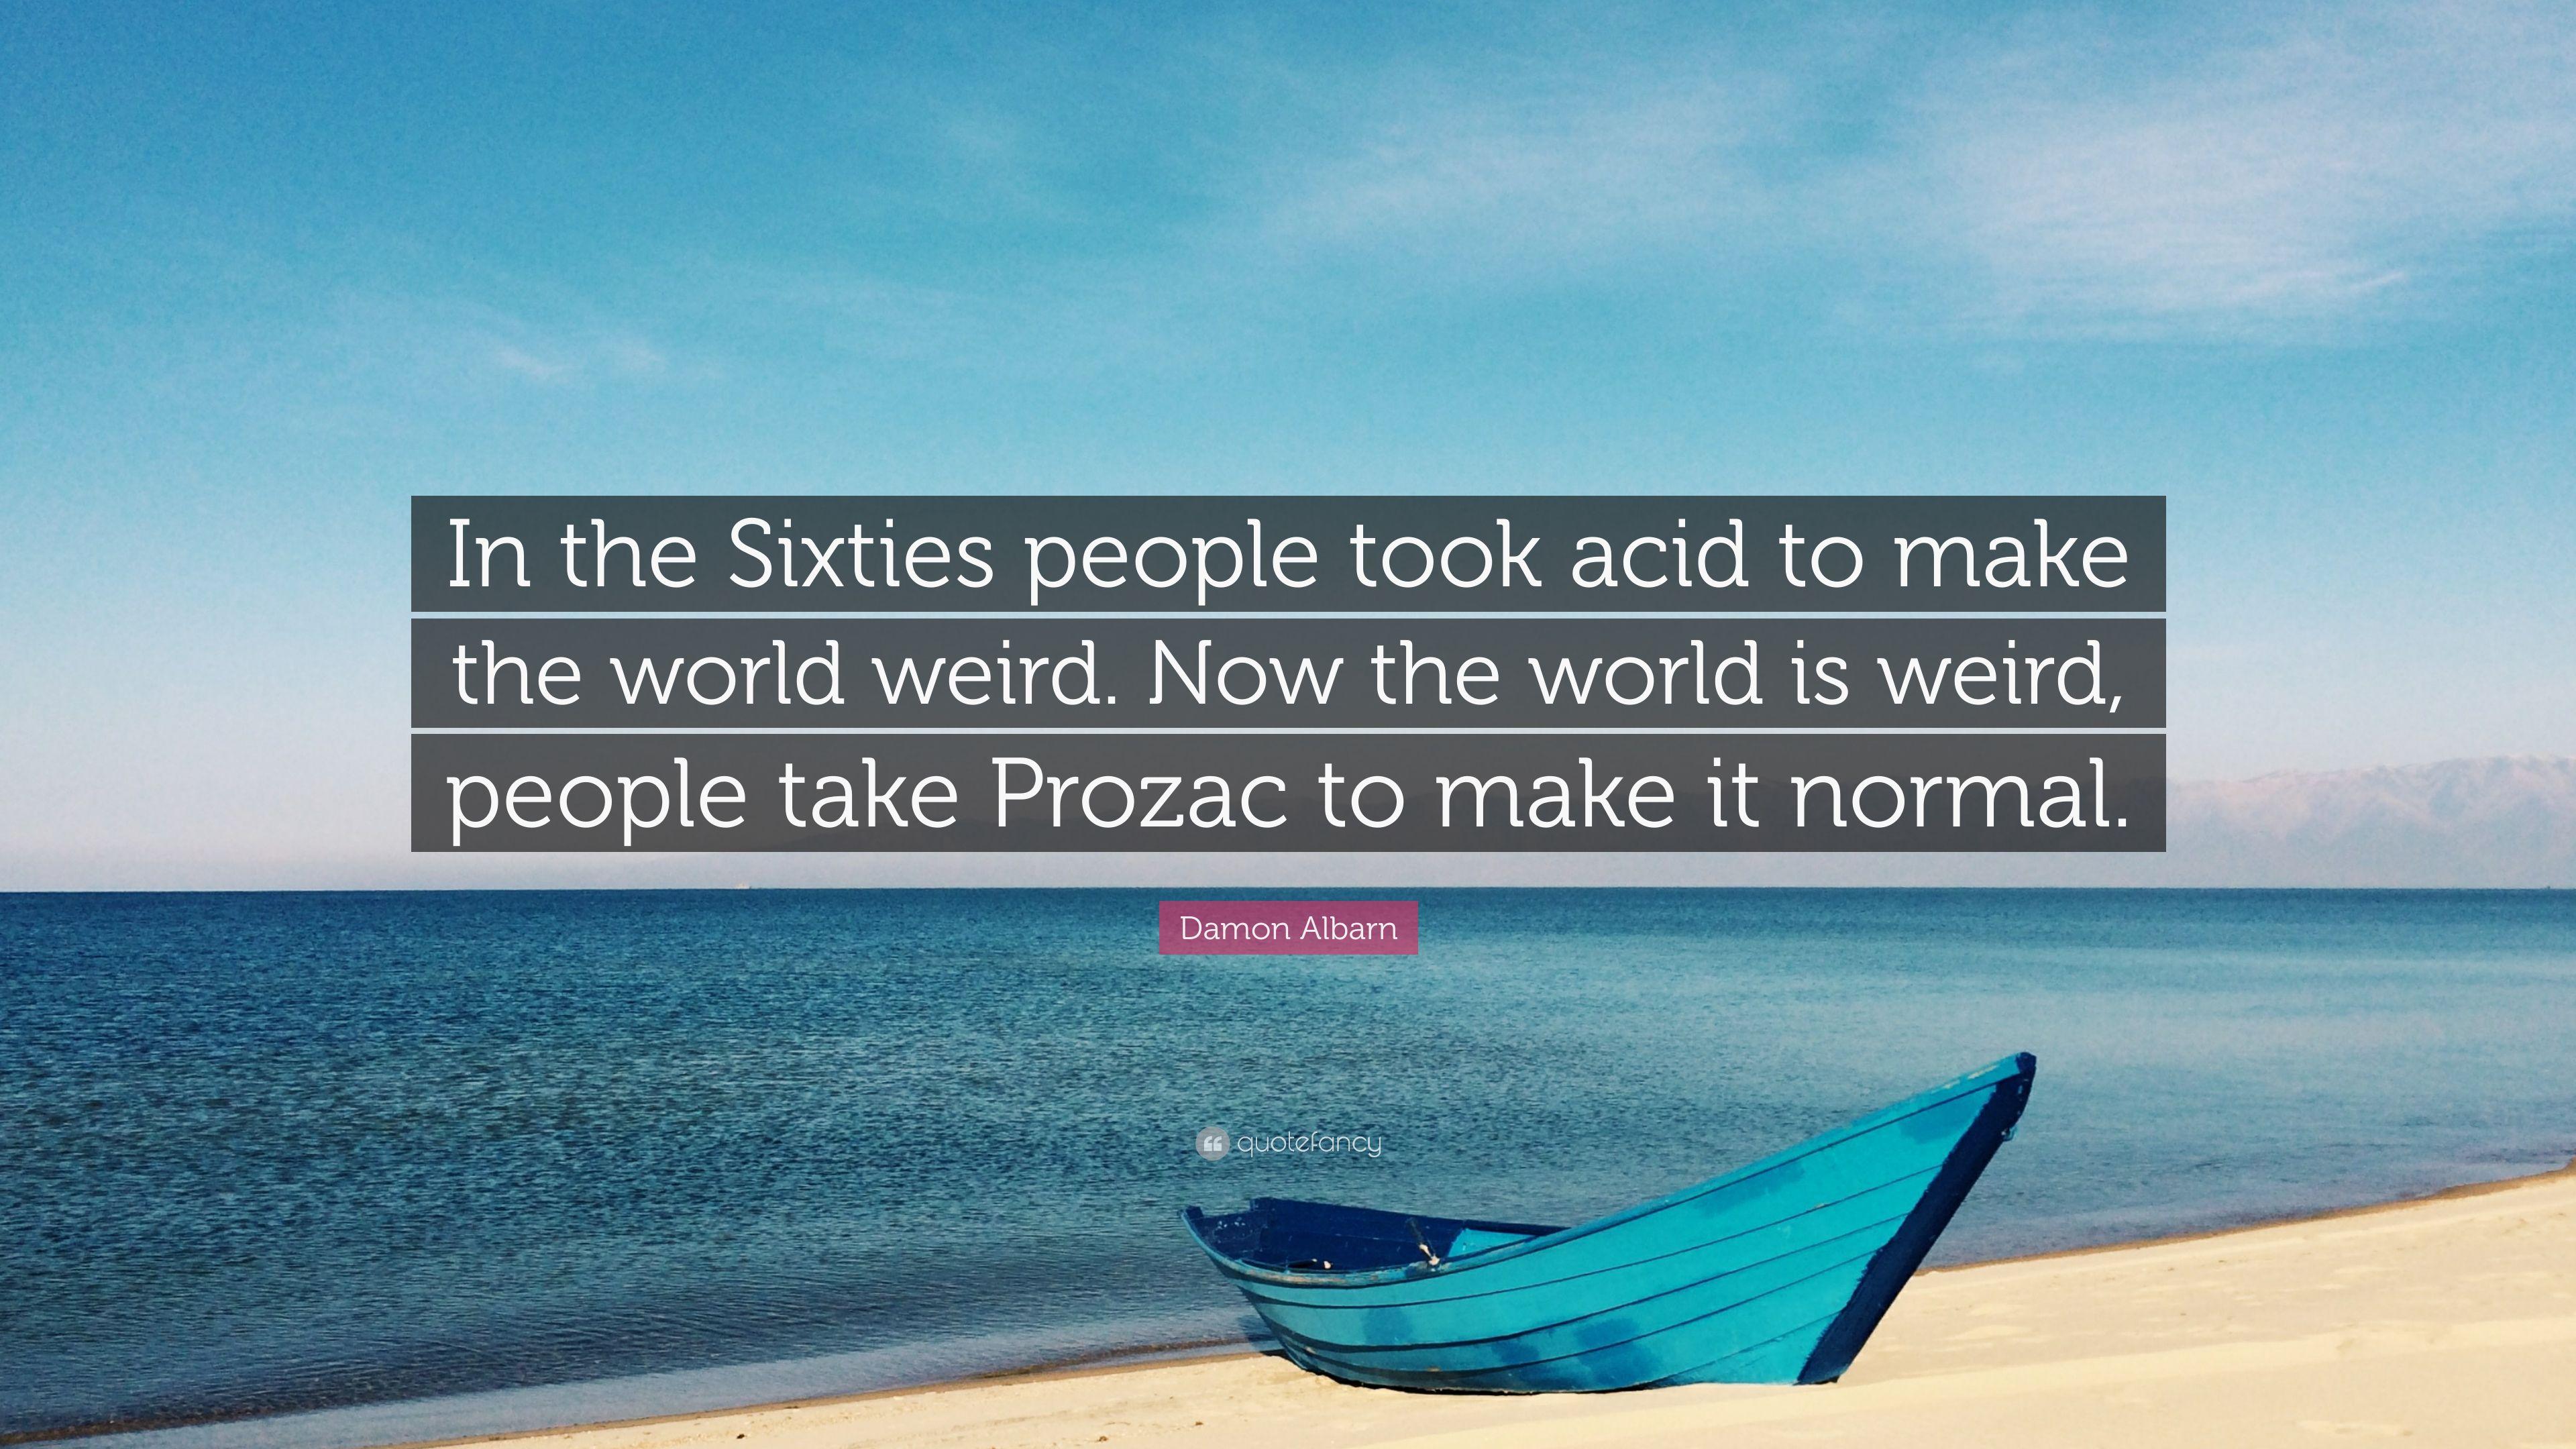 Damon Albarn Quote: “In the Sixties people took acid to make